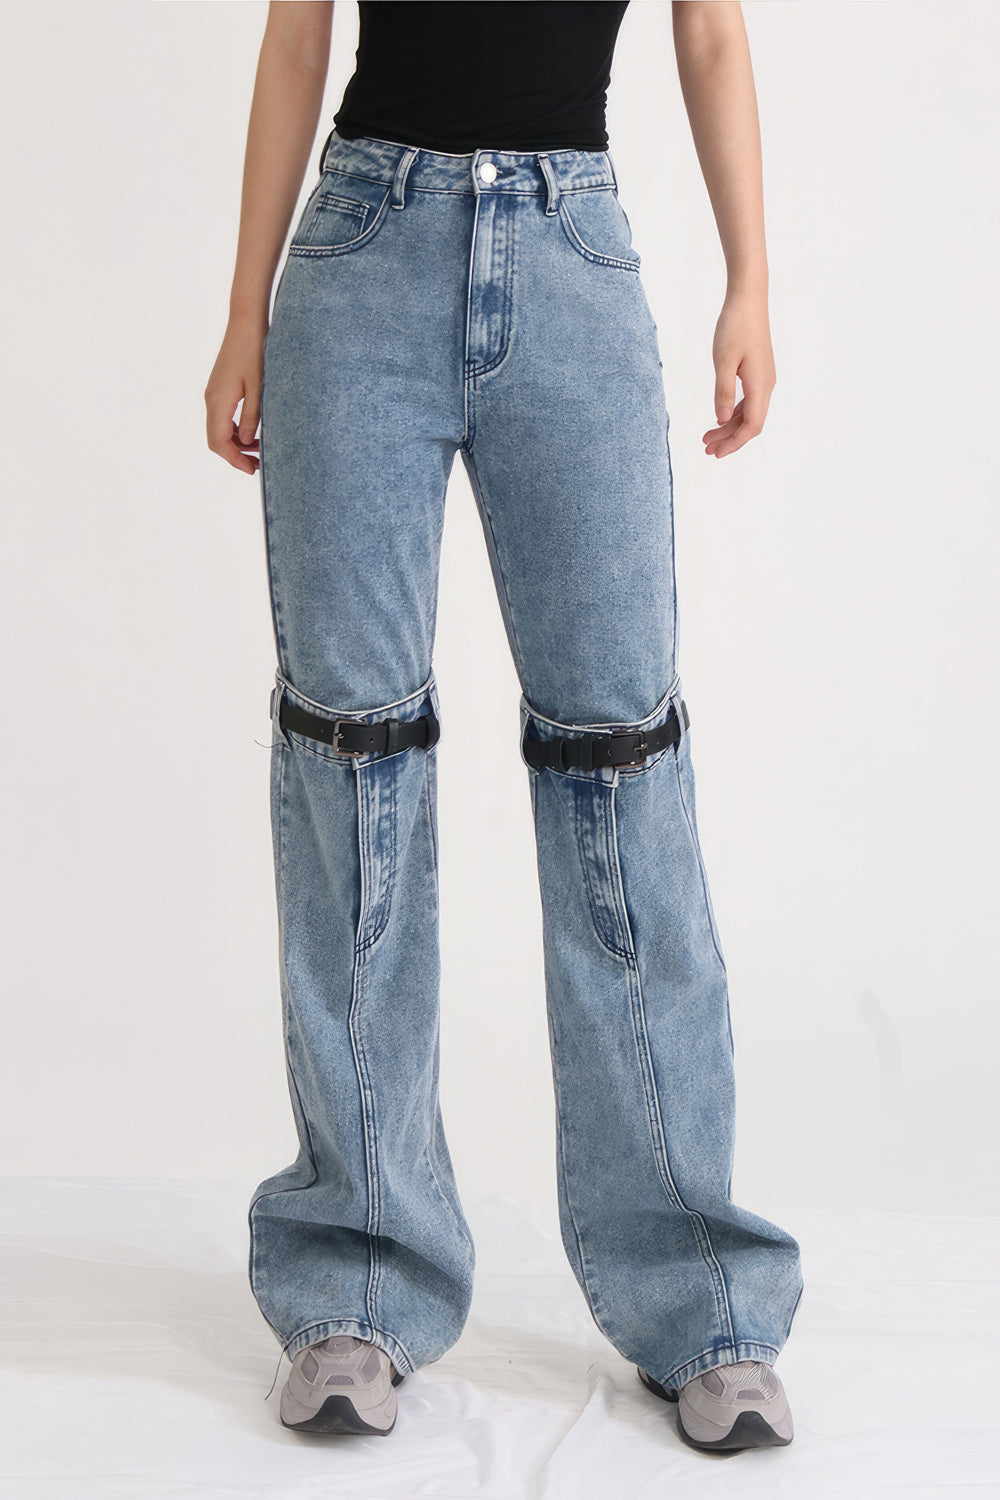 High Waisted Jeans with Knee Cuts - Blue